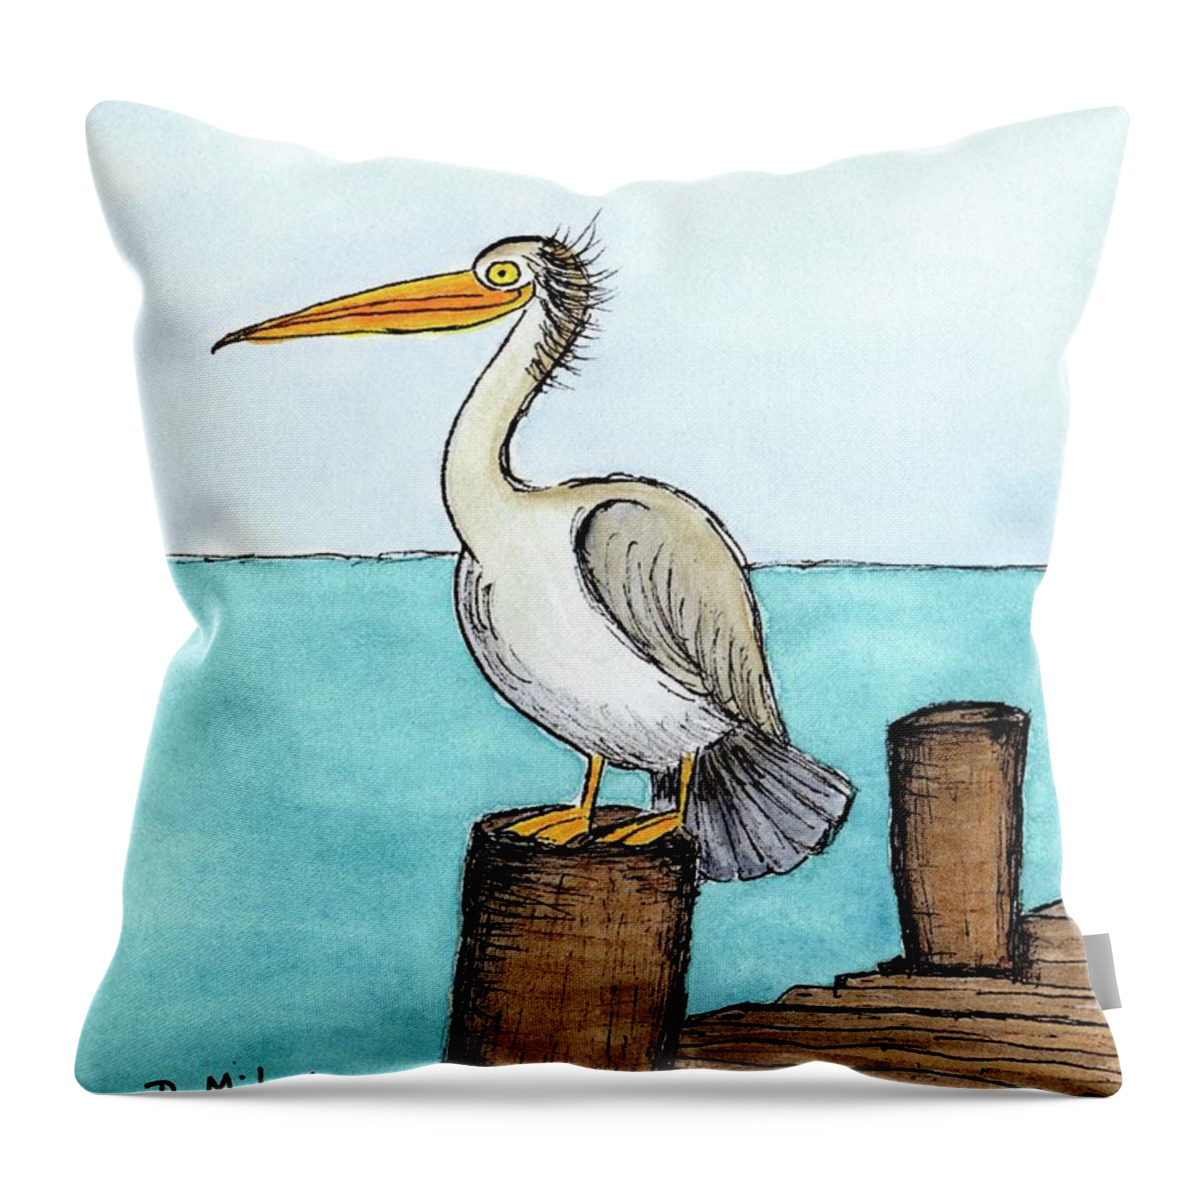 Coastal Bird Throw Pillow featuring the painting Pelican Perched on Pier by Donna Mibus